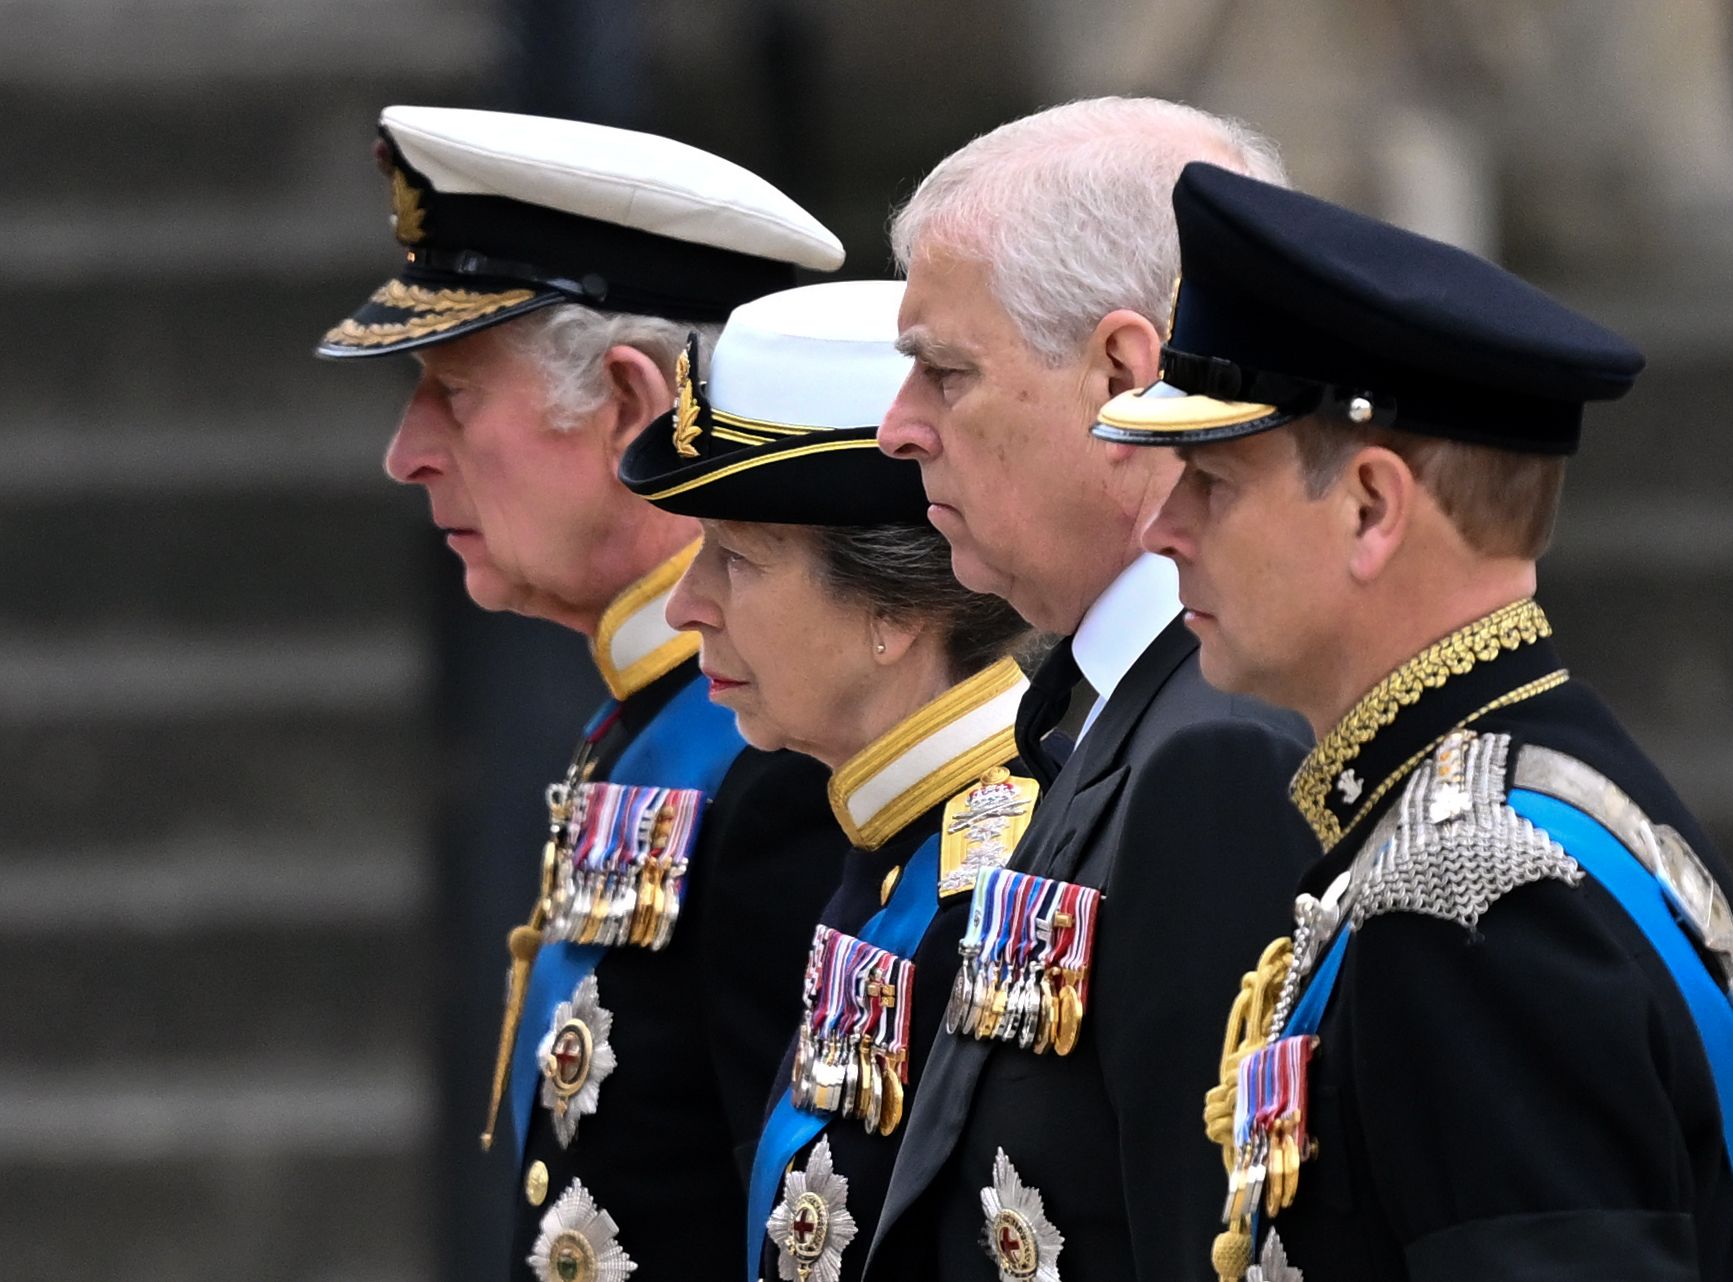 <p>King Charles III, Princess Anne, Prince Andrew and Prince Edward stood behind mother Queen Elizabeth II's coffin at Westminster Abbey in London during <a href="https://www.wonderwall.com/celebrity/royals/best-photos-from-queen-elizabeth-ii-funeral-king-charles-princes-william-prince-harry-george-charlotte-kate-meghan652347.gallery">her state funeral</a> on Sept. 19, 2022.</p>